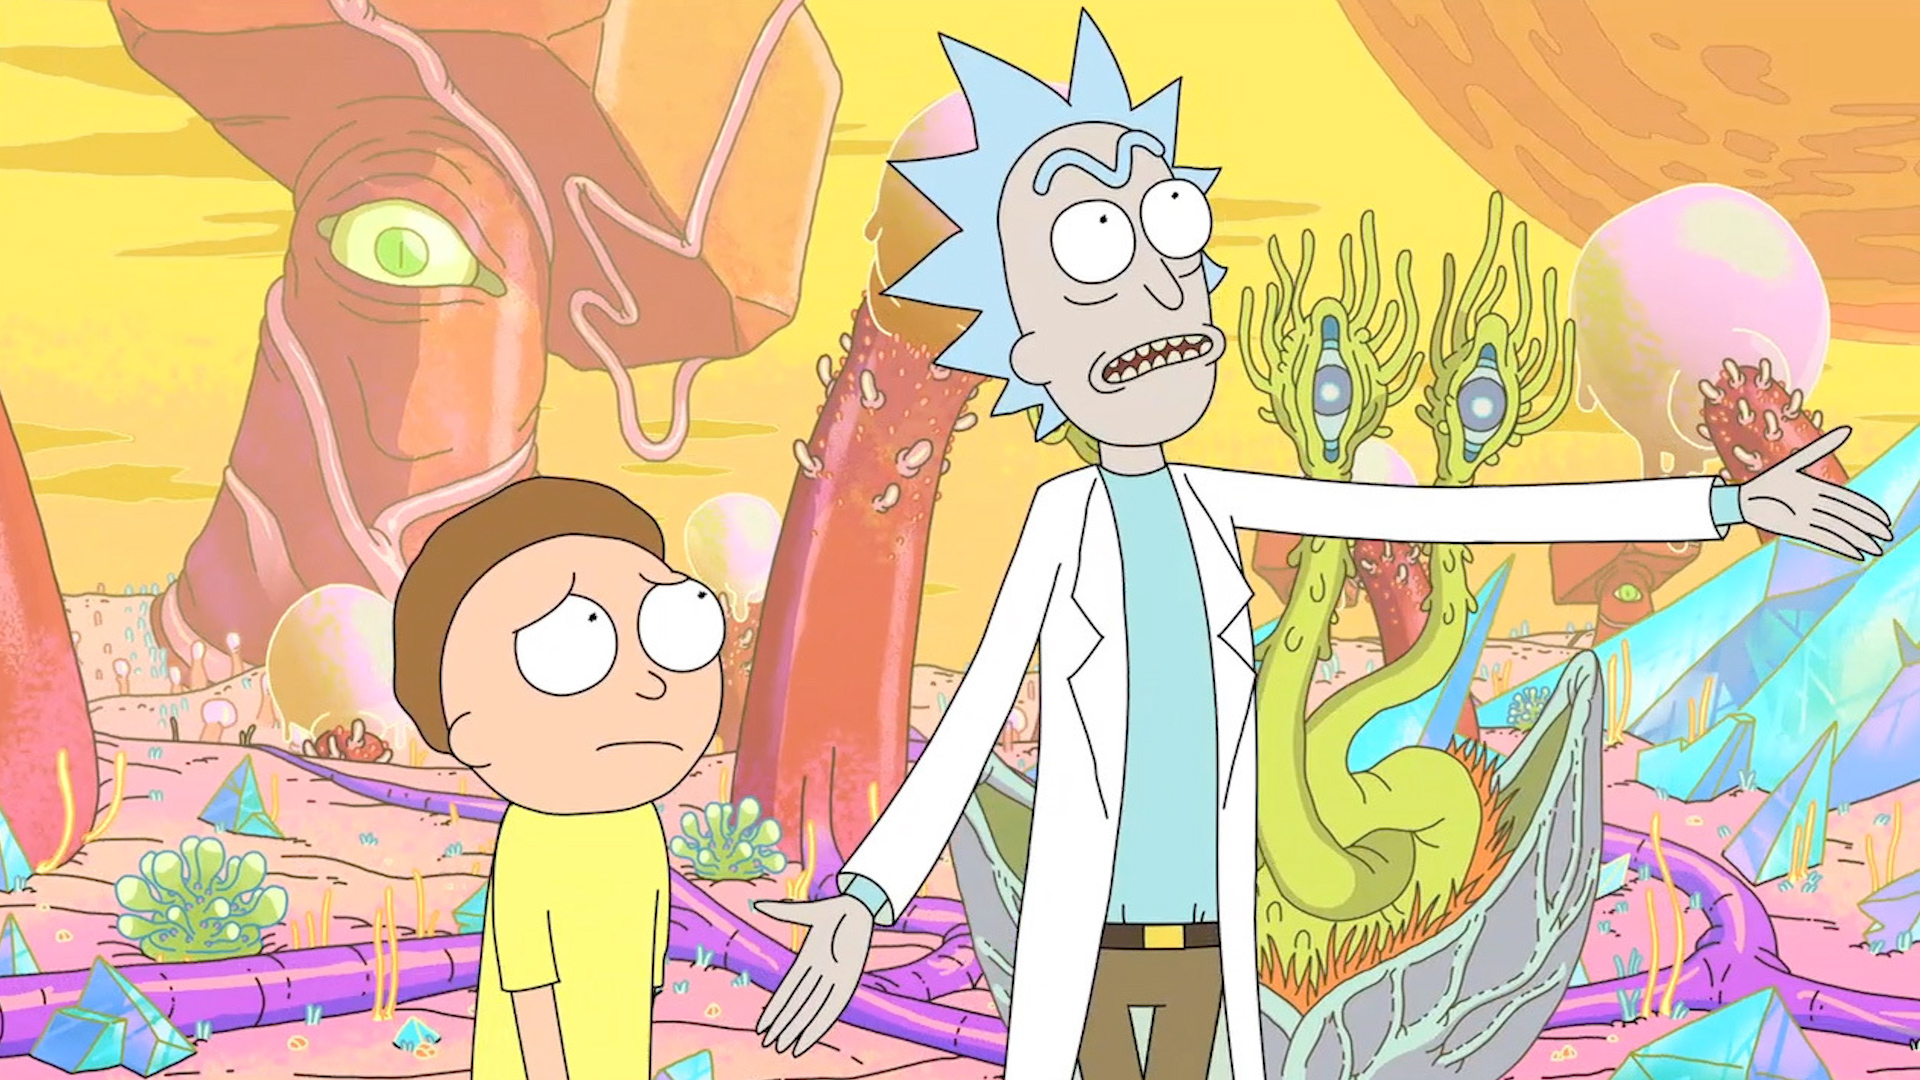 Rick Sanchez with his grandson Morty Smith in Rick and Morty (2013-).